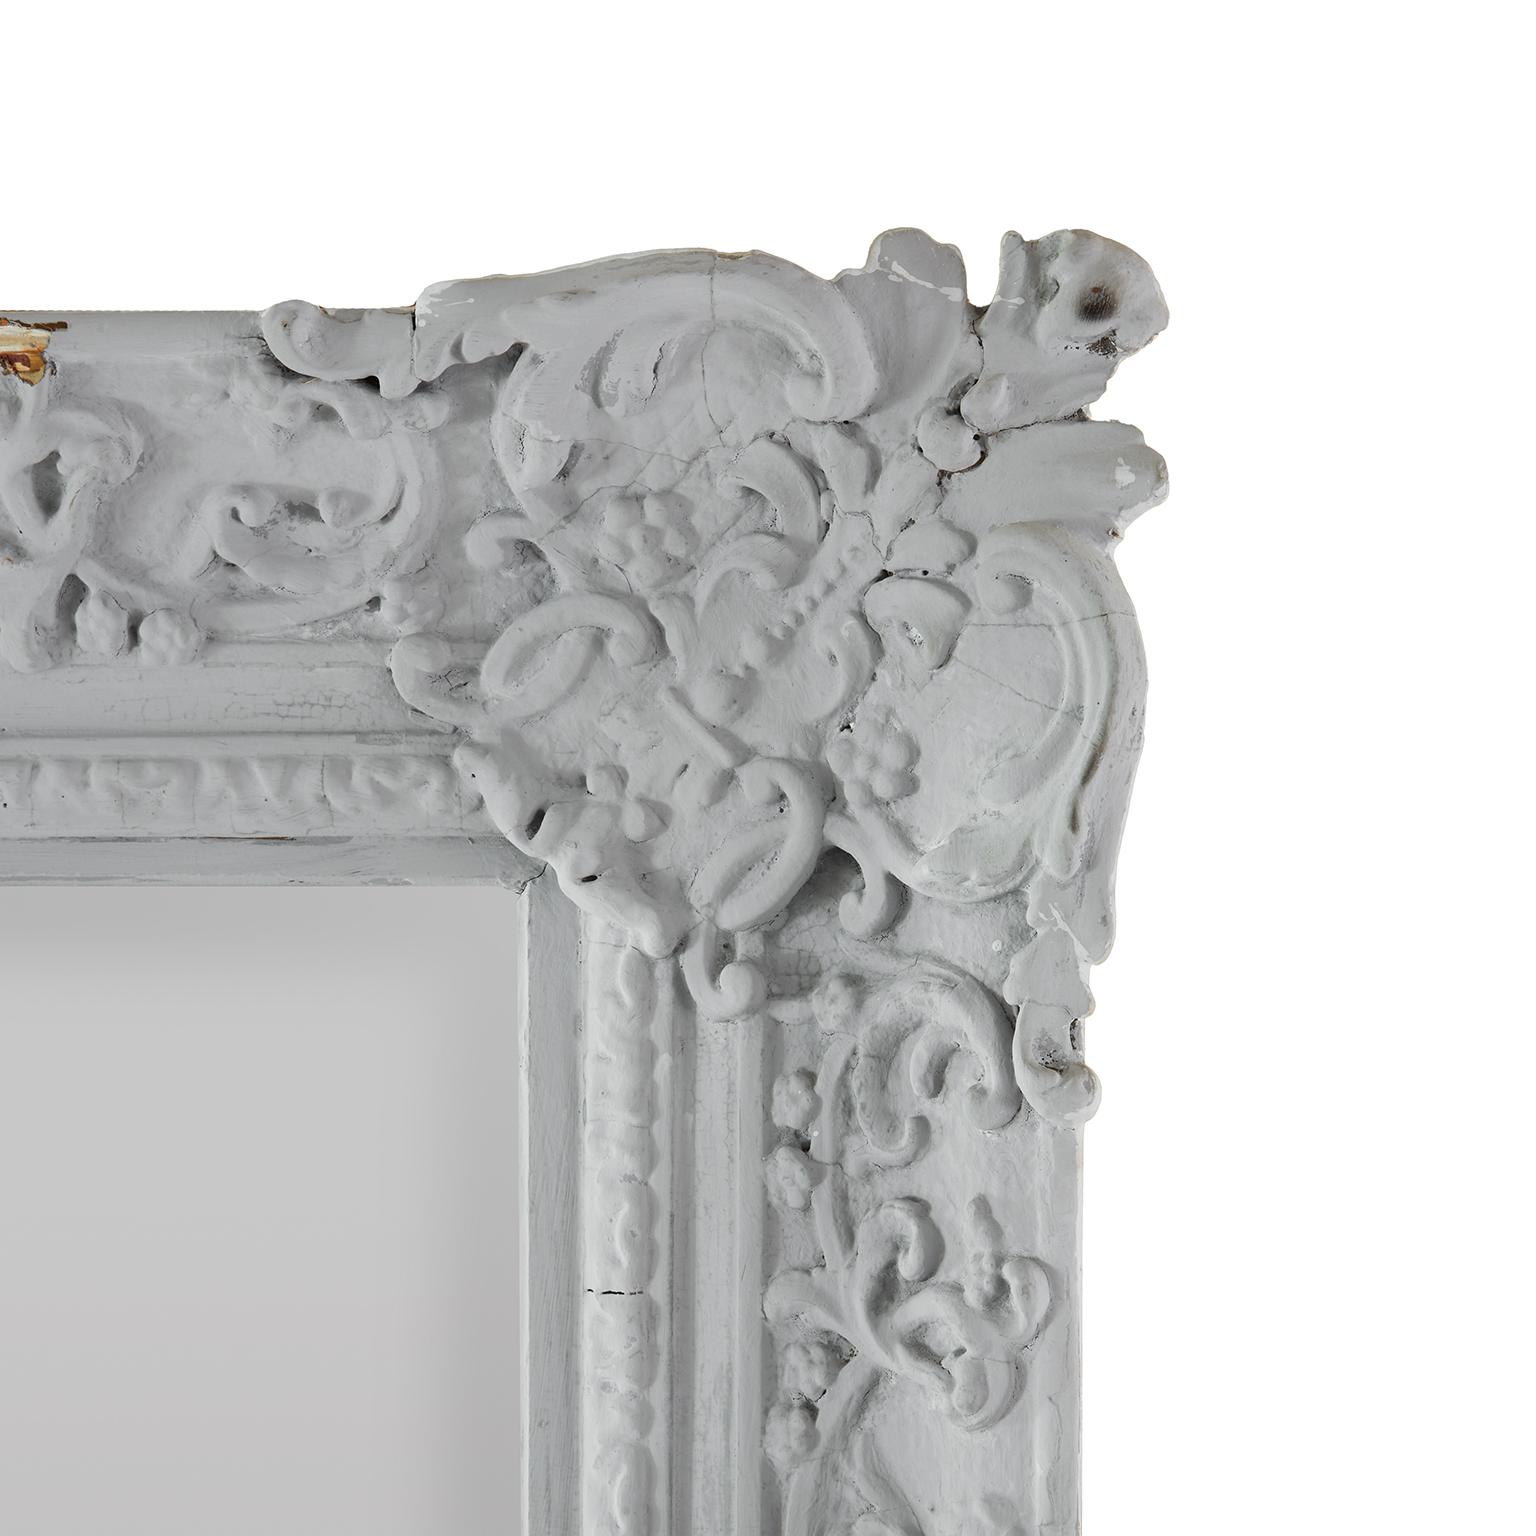 Large French 18th century mirror a plaster and wooden frame decorated throughout with foliate scrolls and floral, leafted pastiglia ornaments. 
French origin, this antique rectangular mirror was hanged in a private residence in Milan downtown and